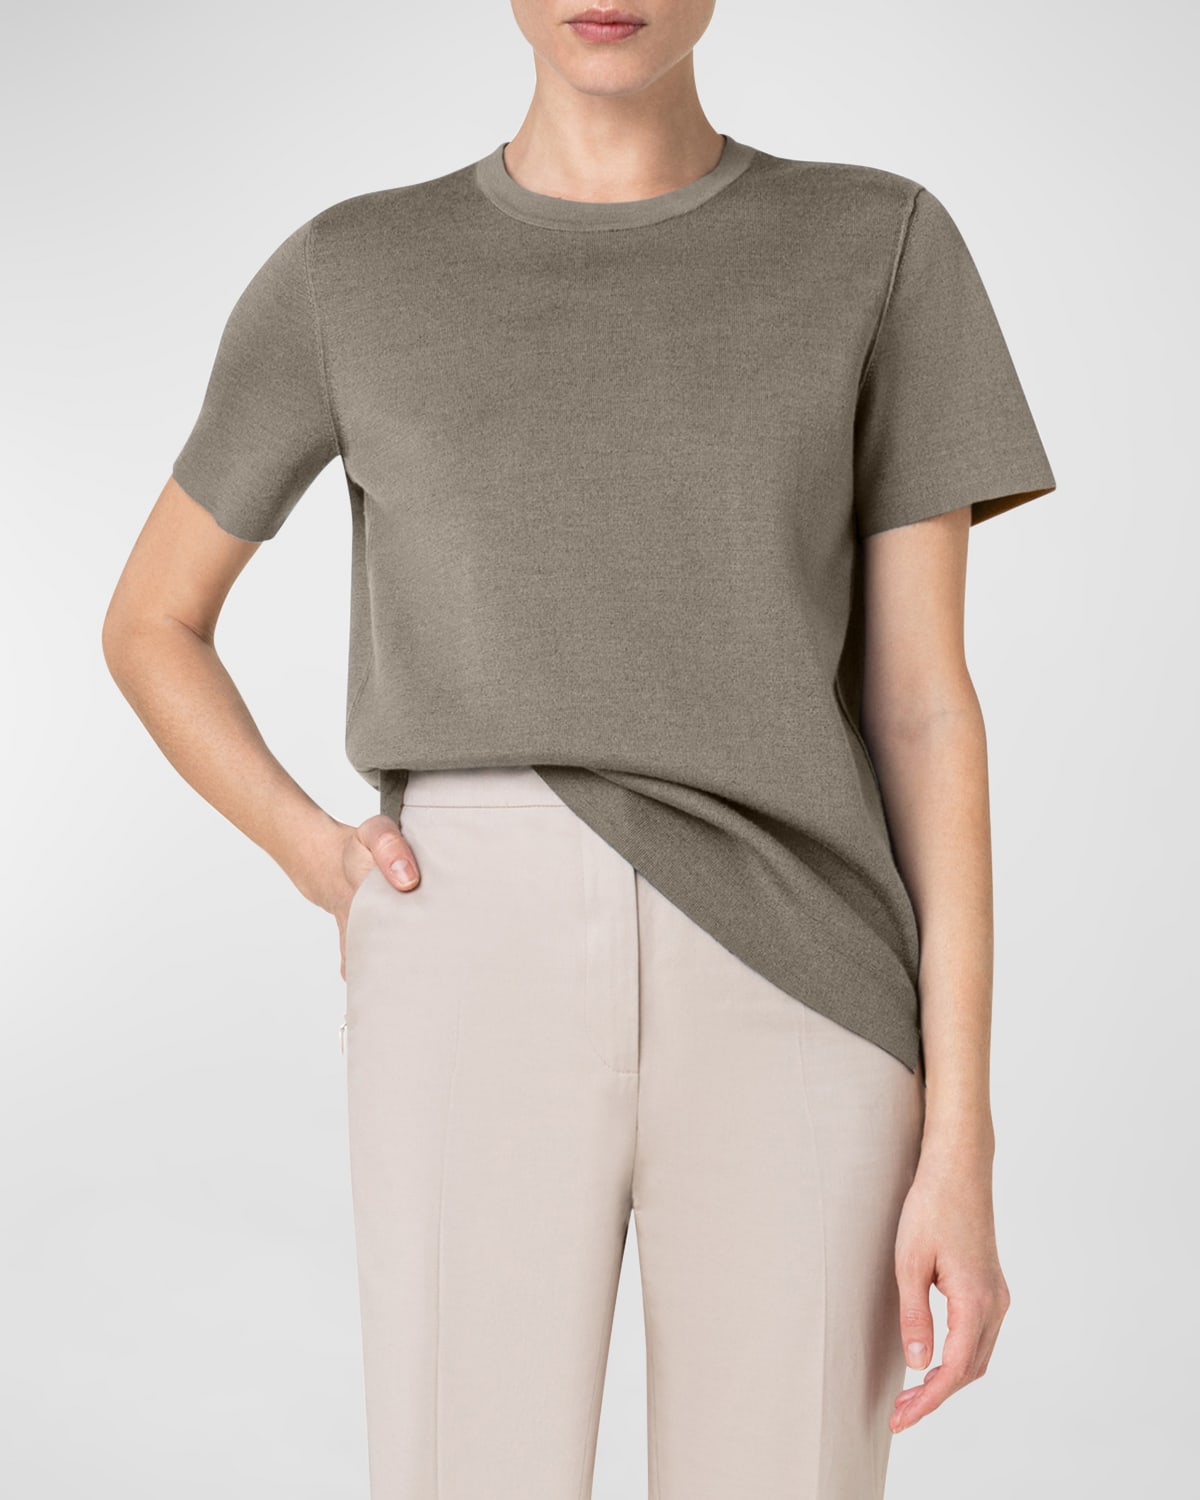 Akris Bi-color Reversible Knit Wool Pullover Shirt In Greige-seagrass